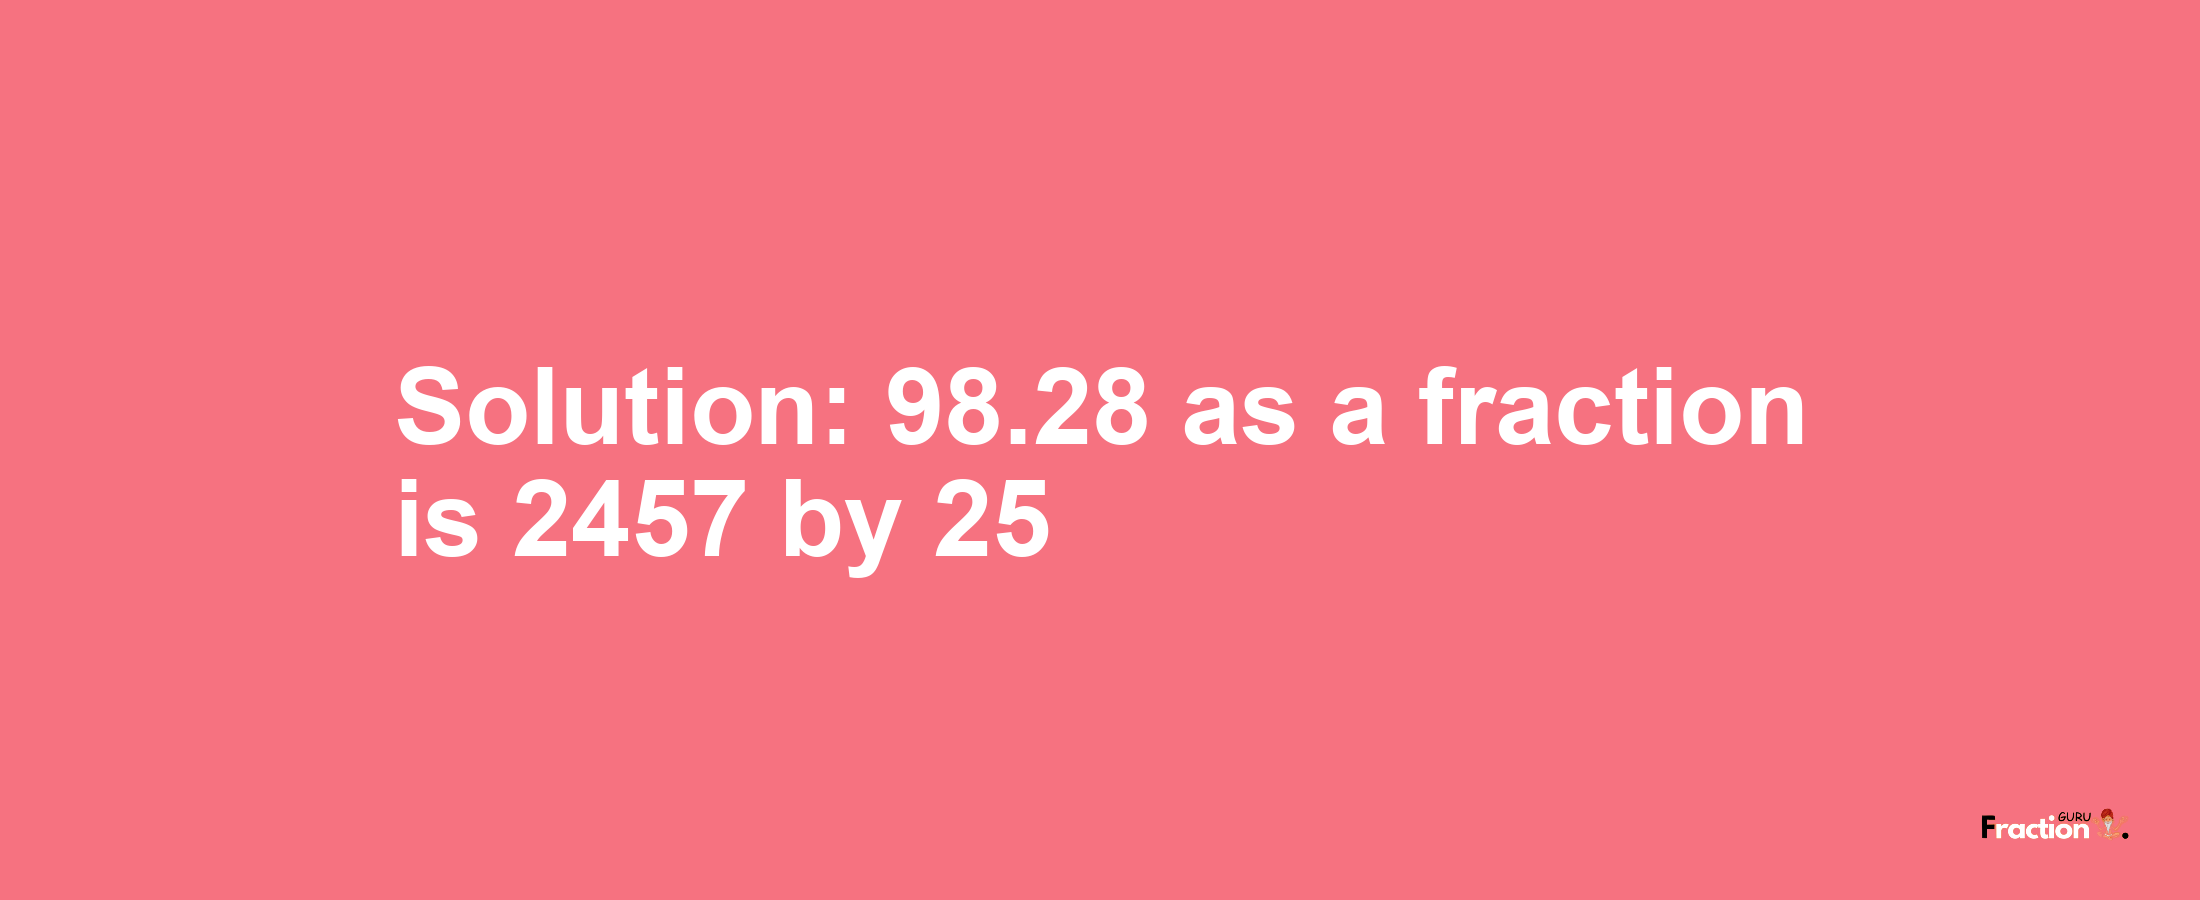 Solution:98.28 as a fraction is 2457/25